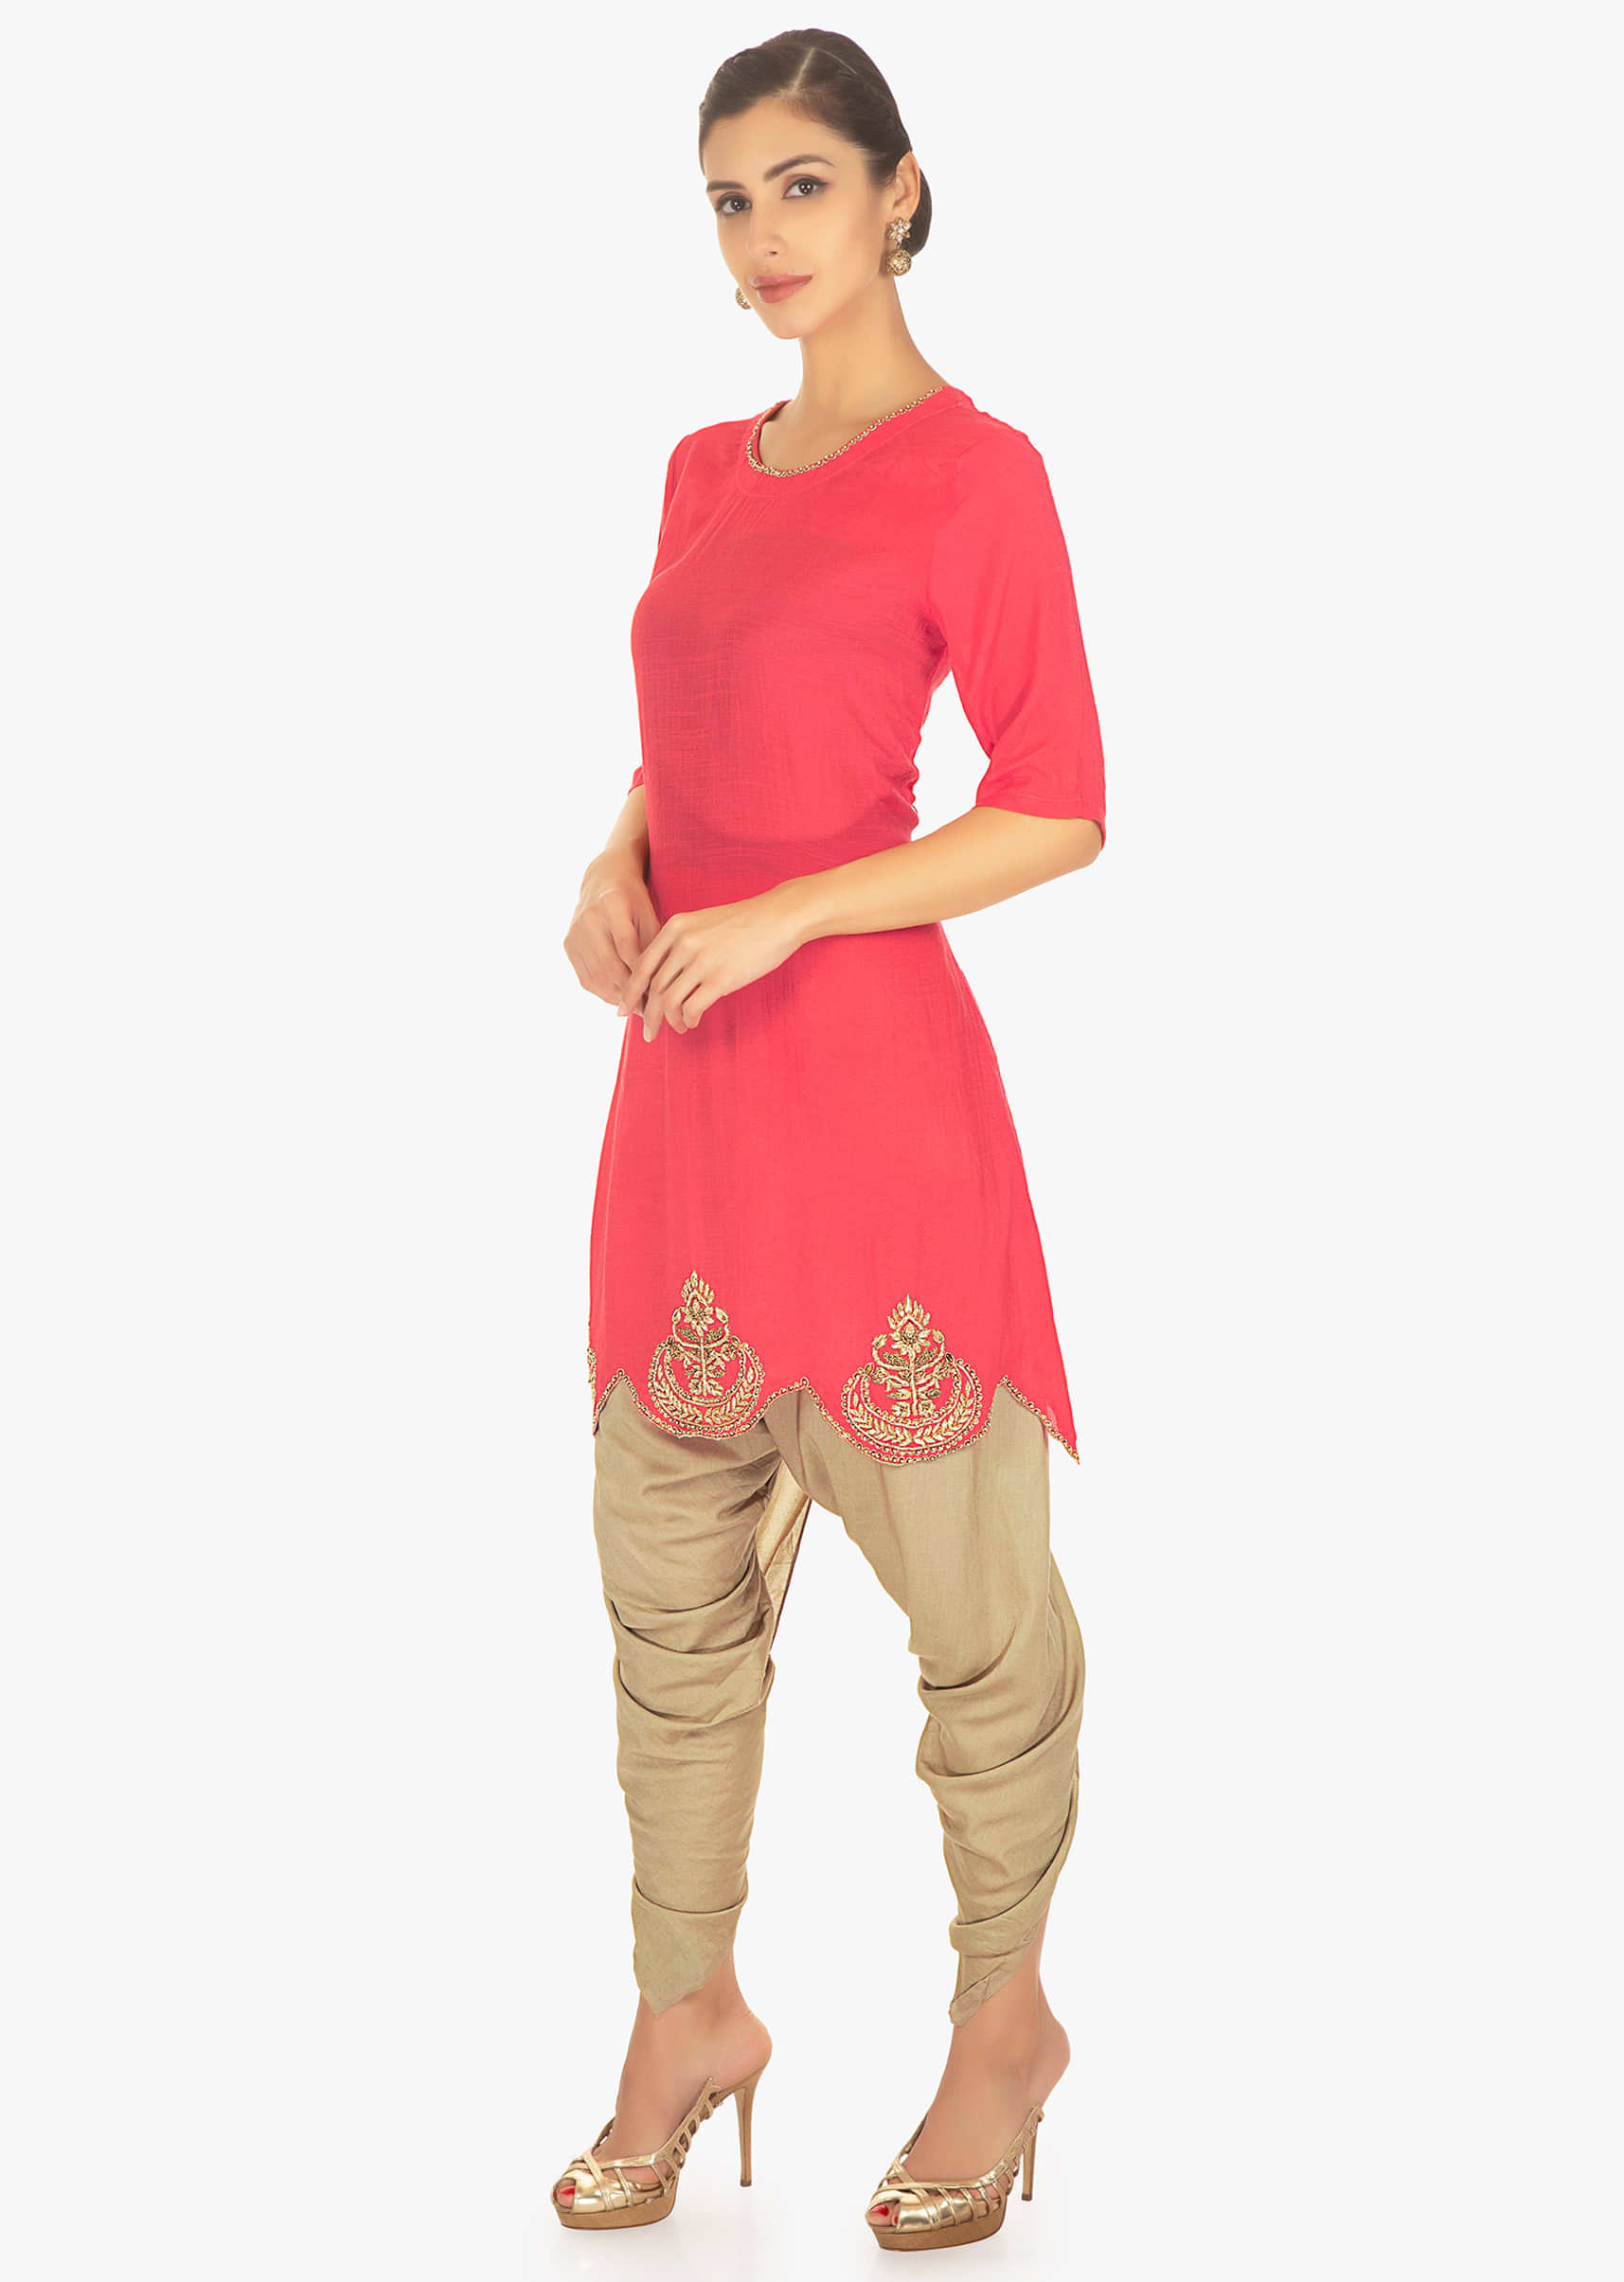 Coral pink silk top paired with a brown cotton dhoti pants